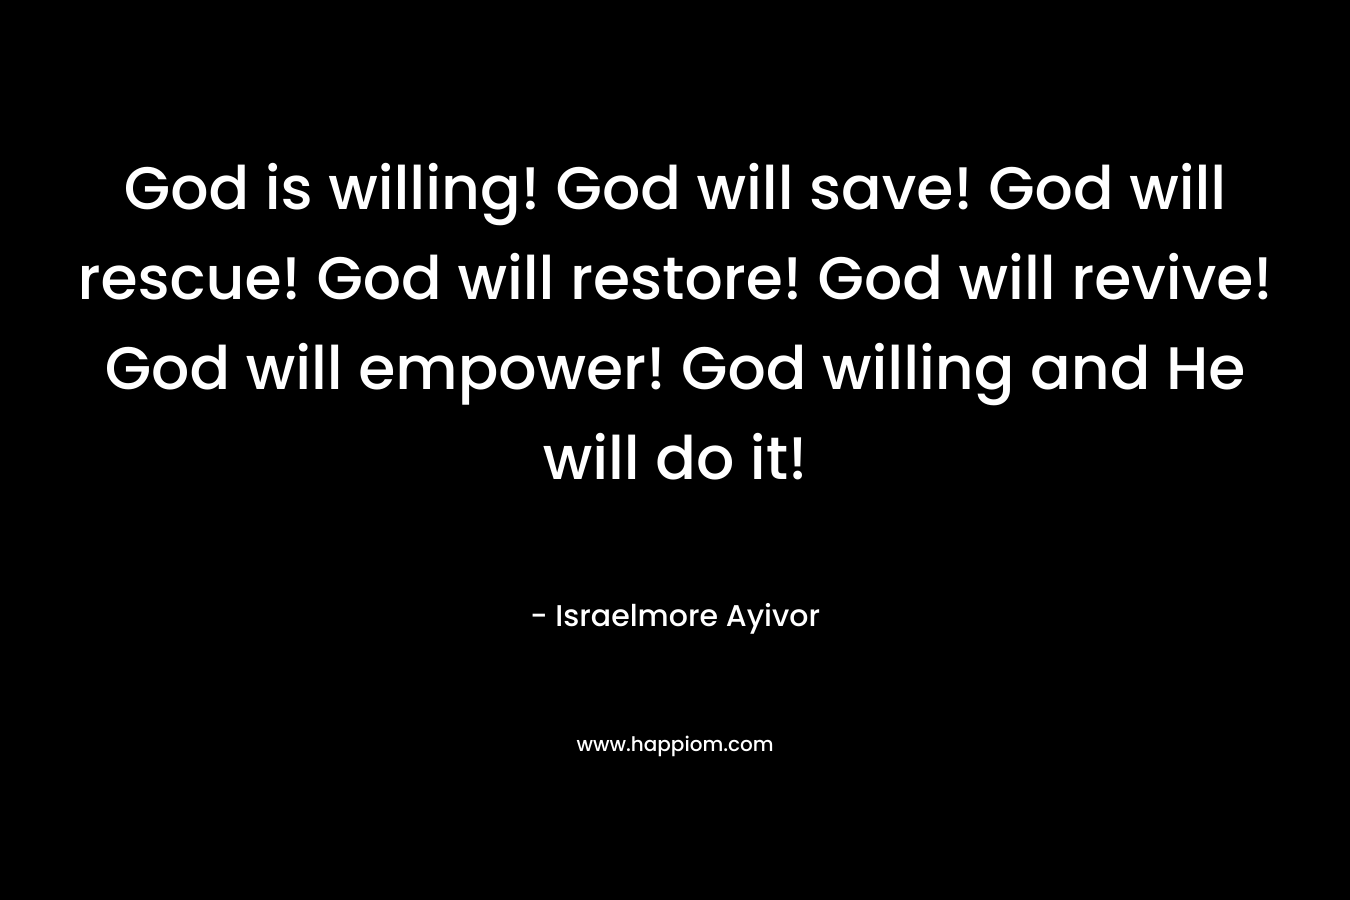 God is willing! God will save! God will rescue! God will restore! God will revive! God will empower! God willing and He will do it!